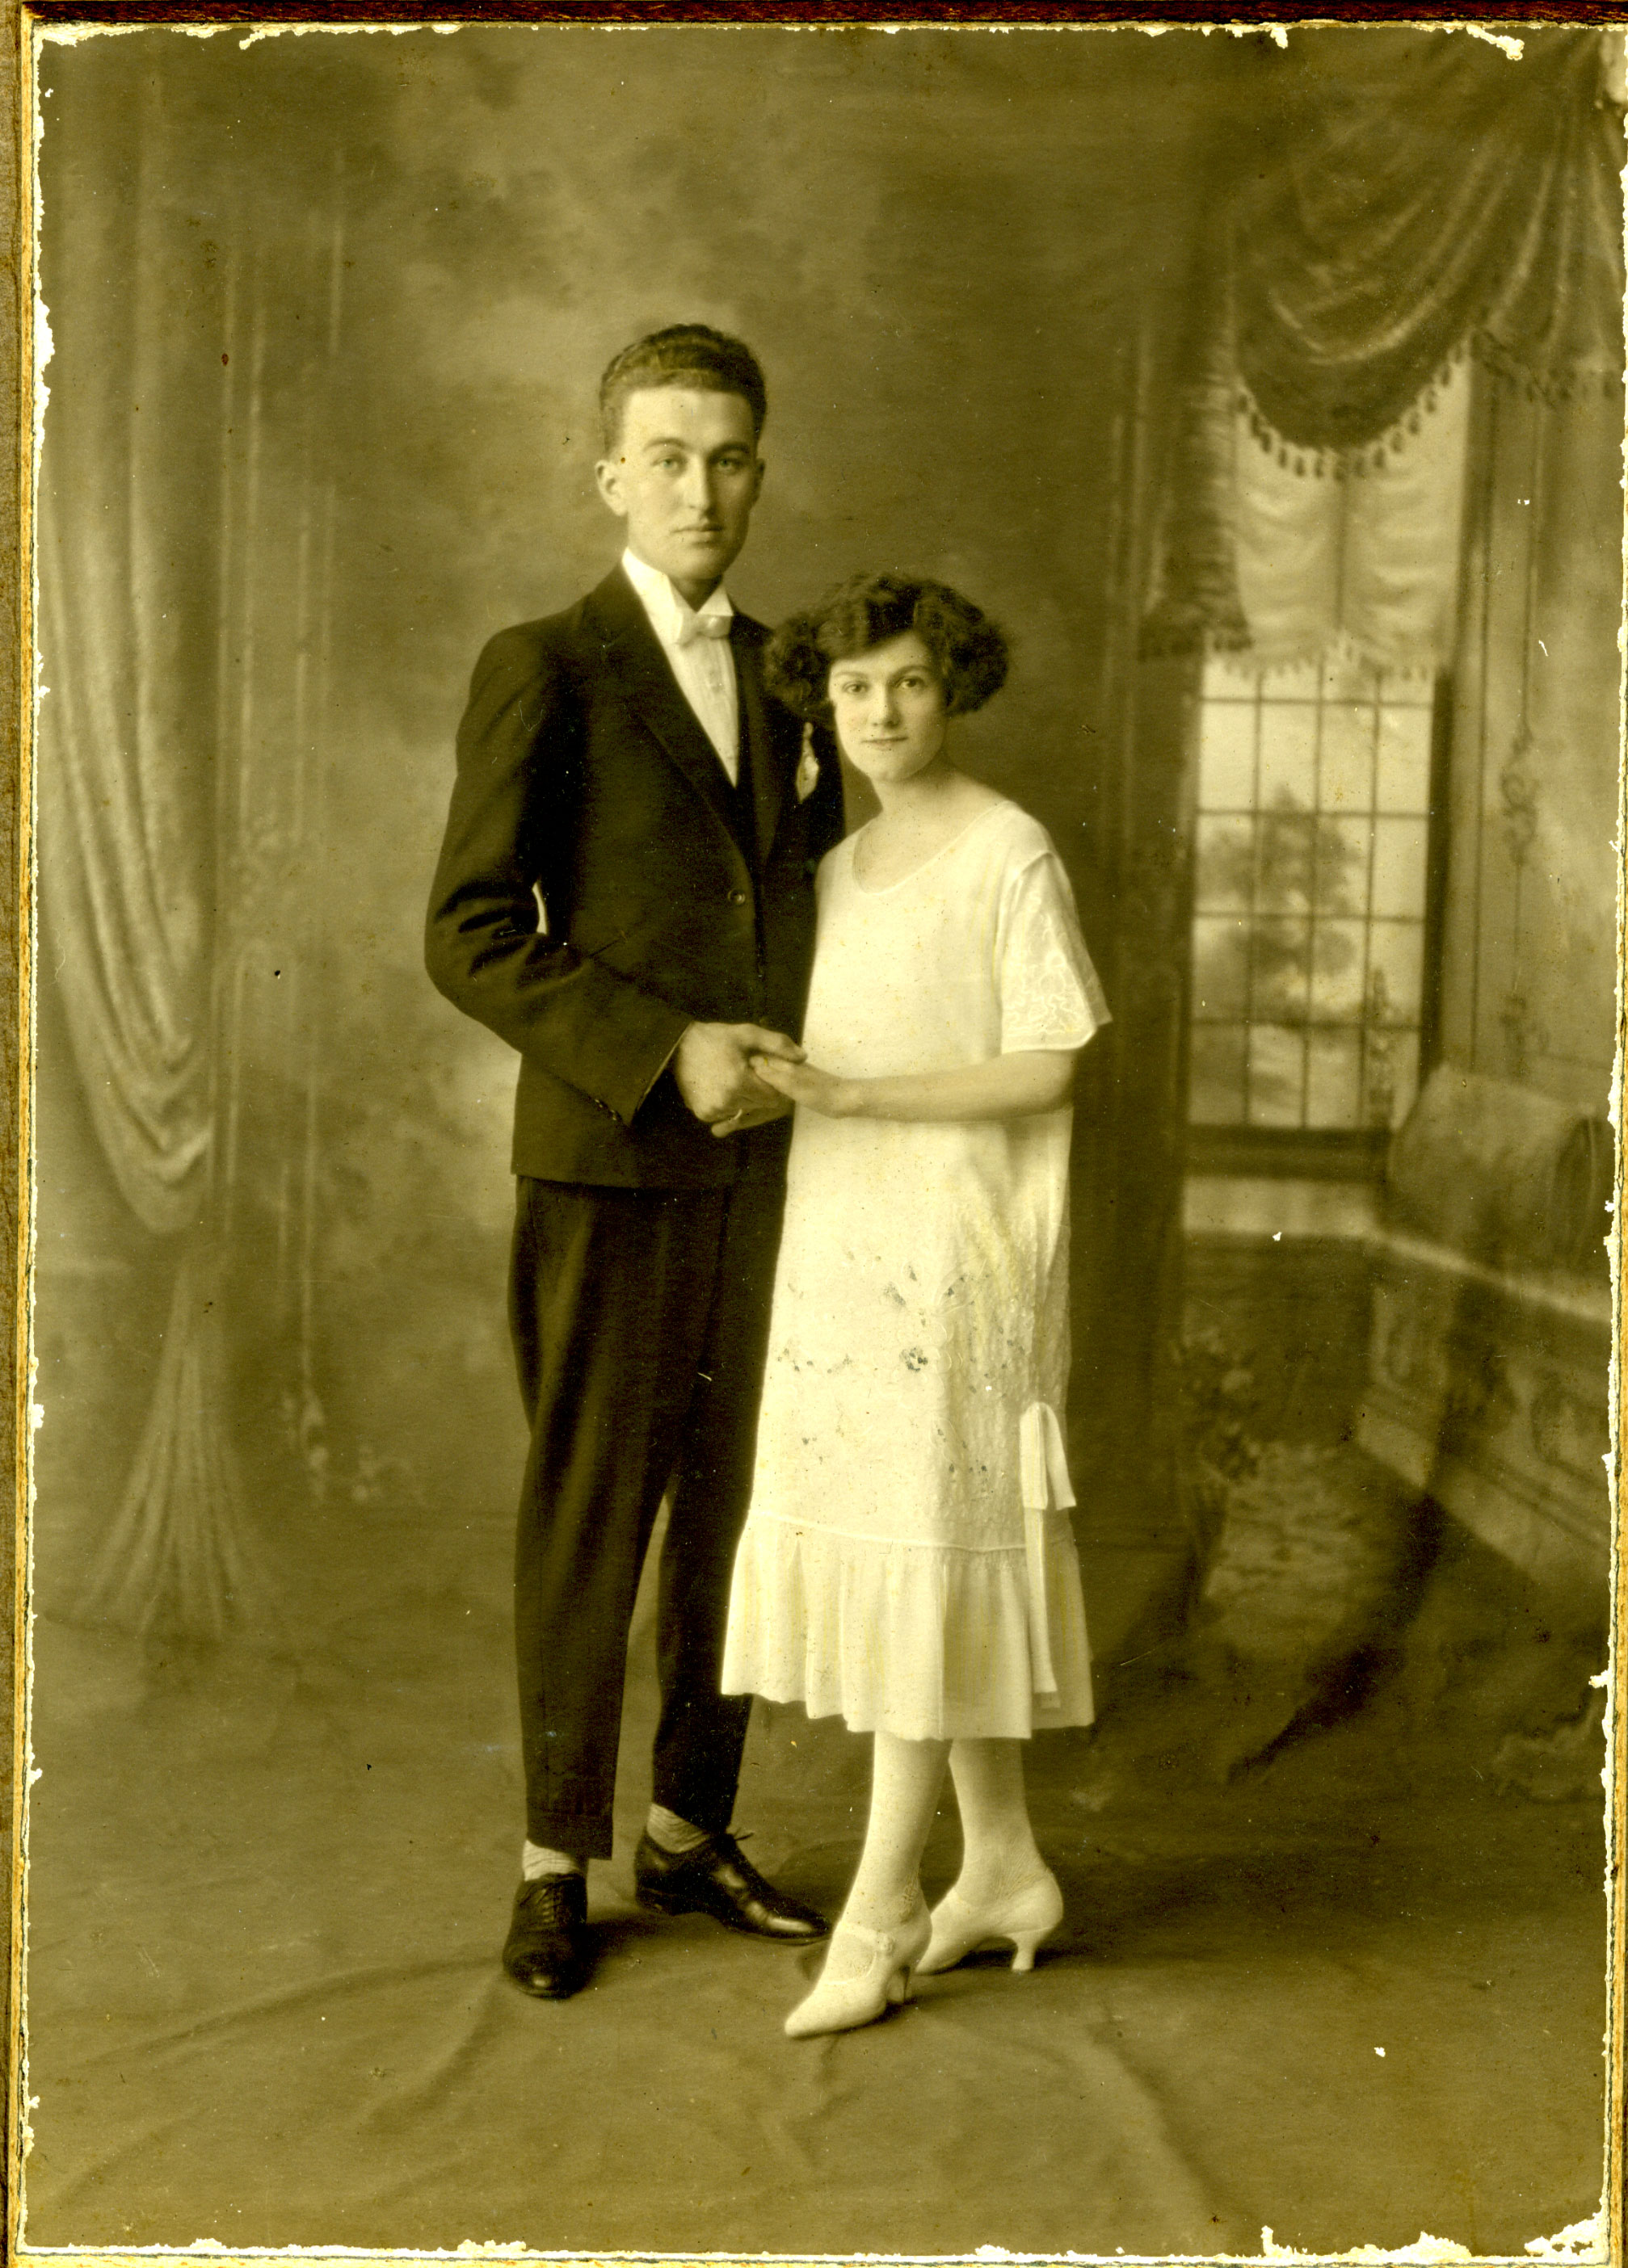 Man and lady posing for photo